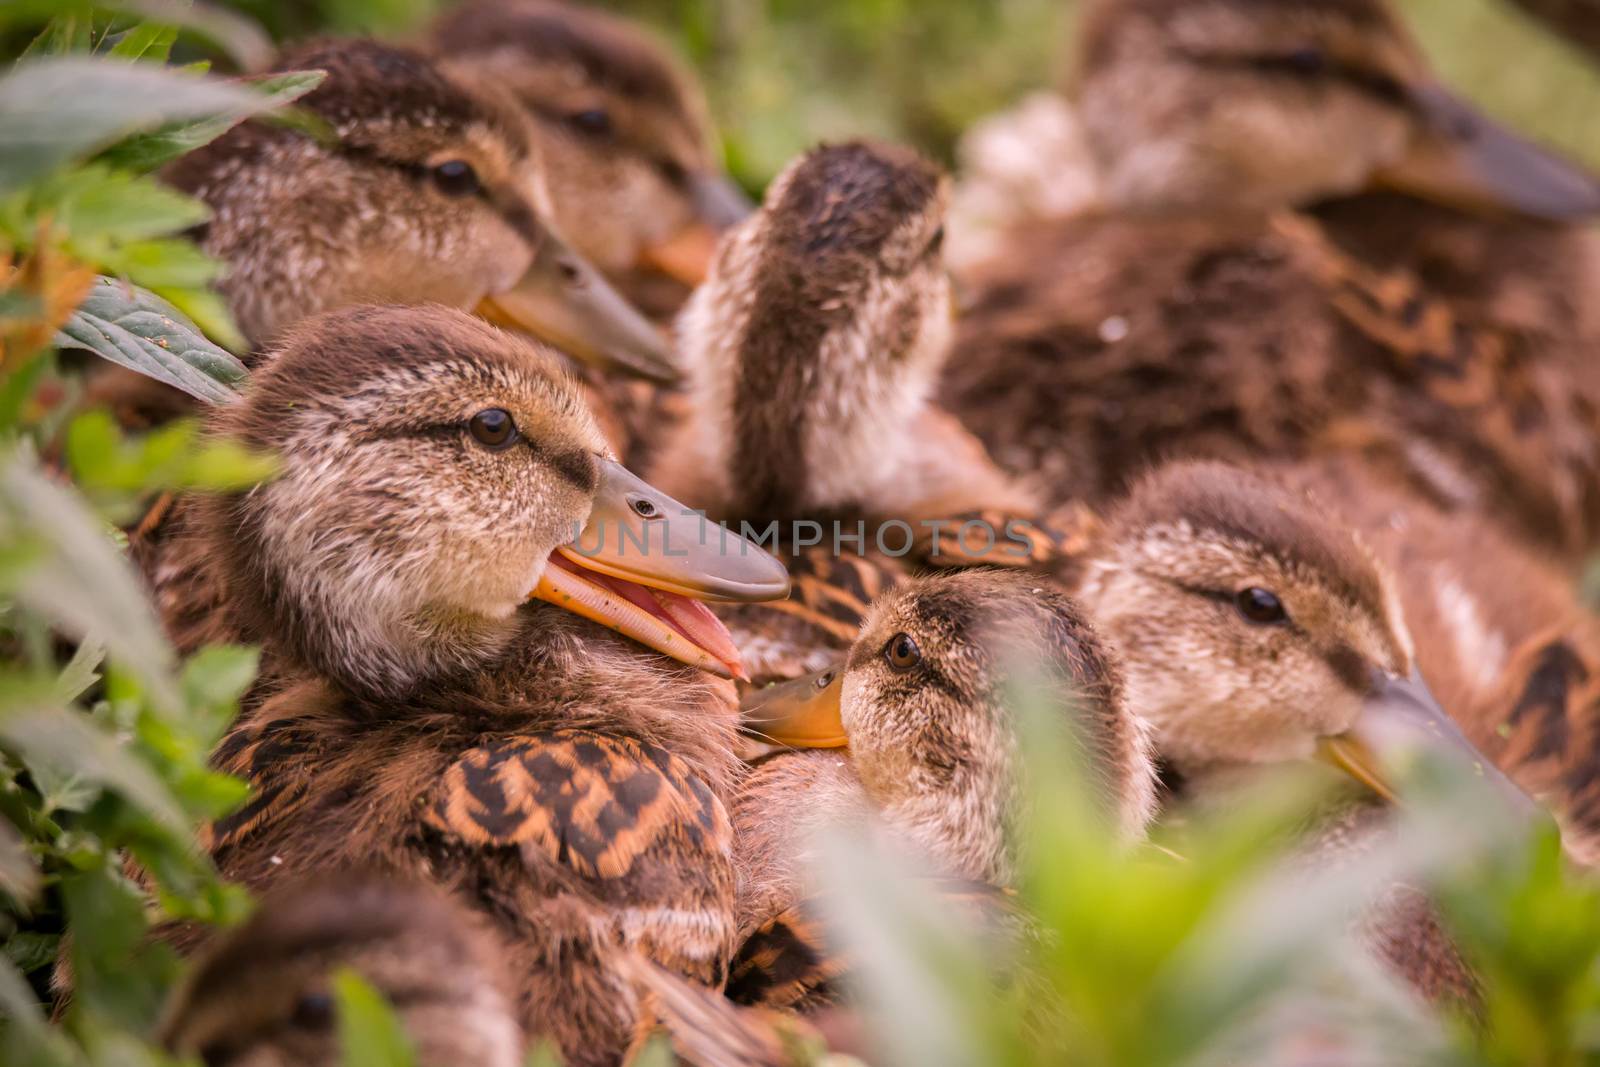 Several Ducklings Huddled Together With One Smiling